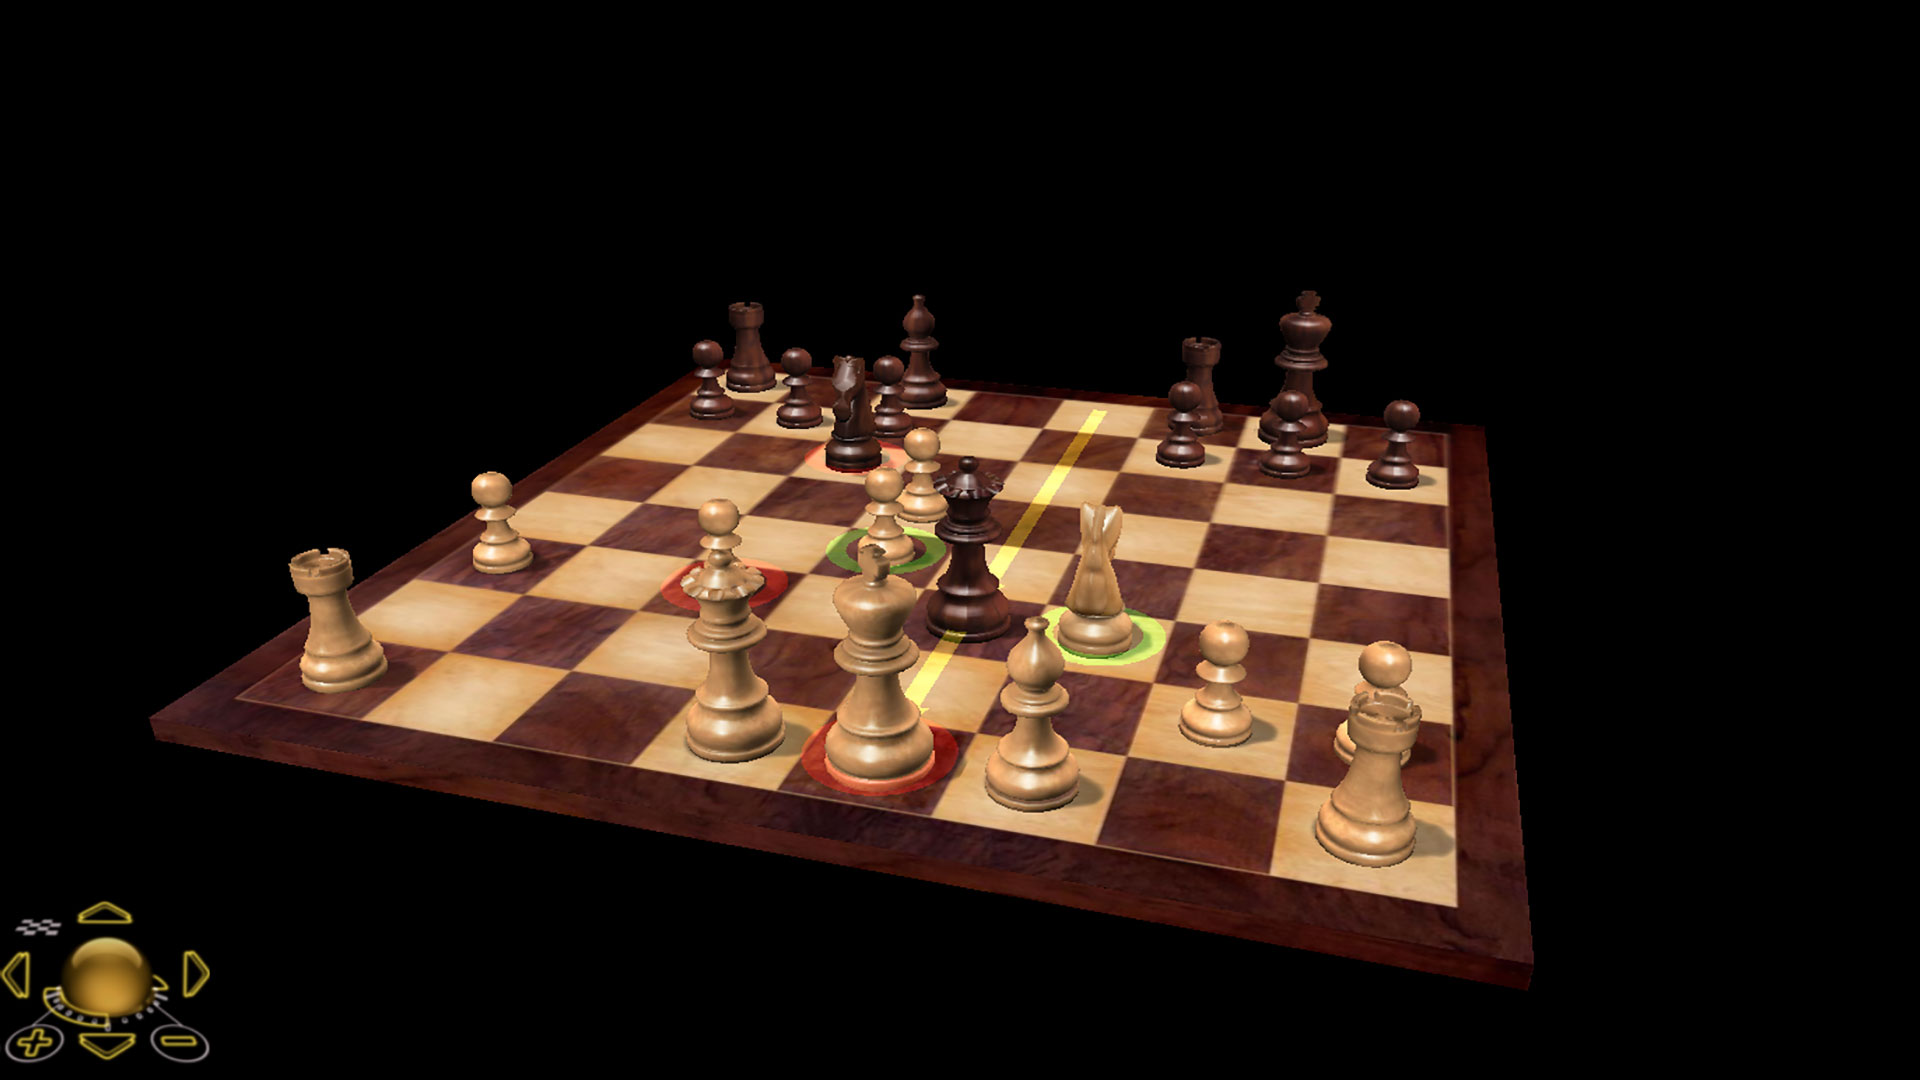 fritz chess 13 download free